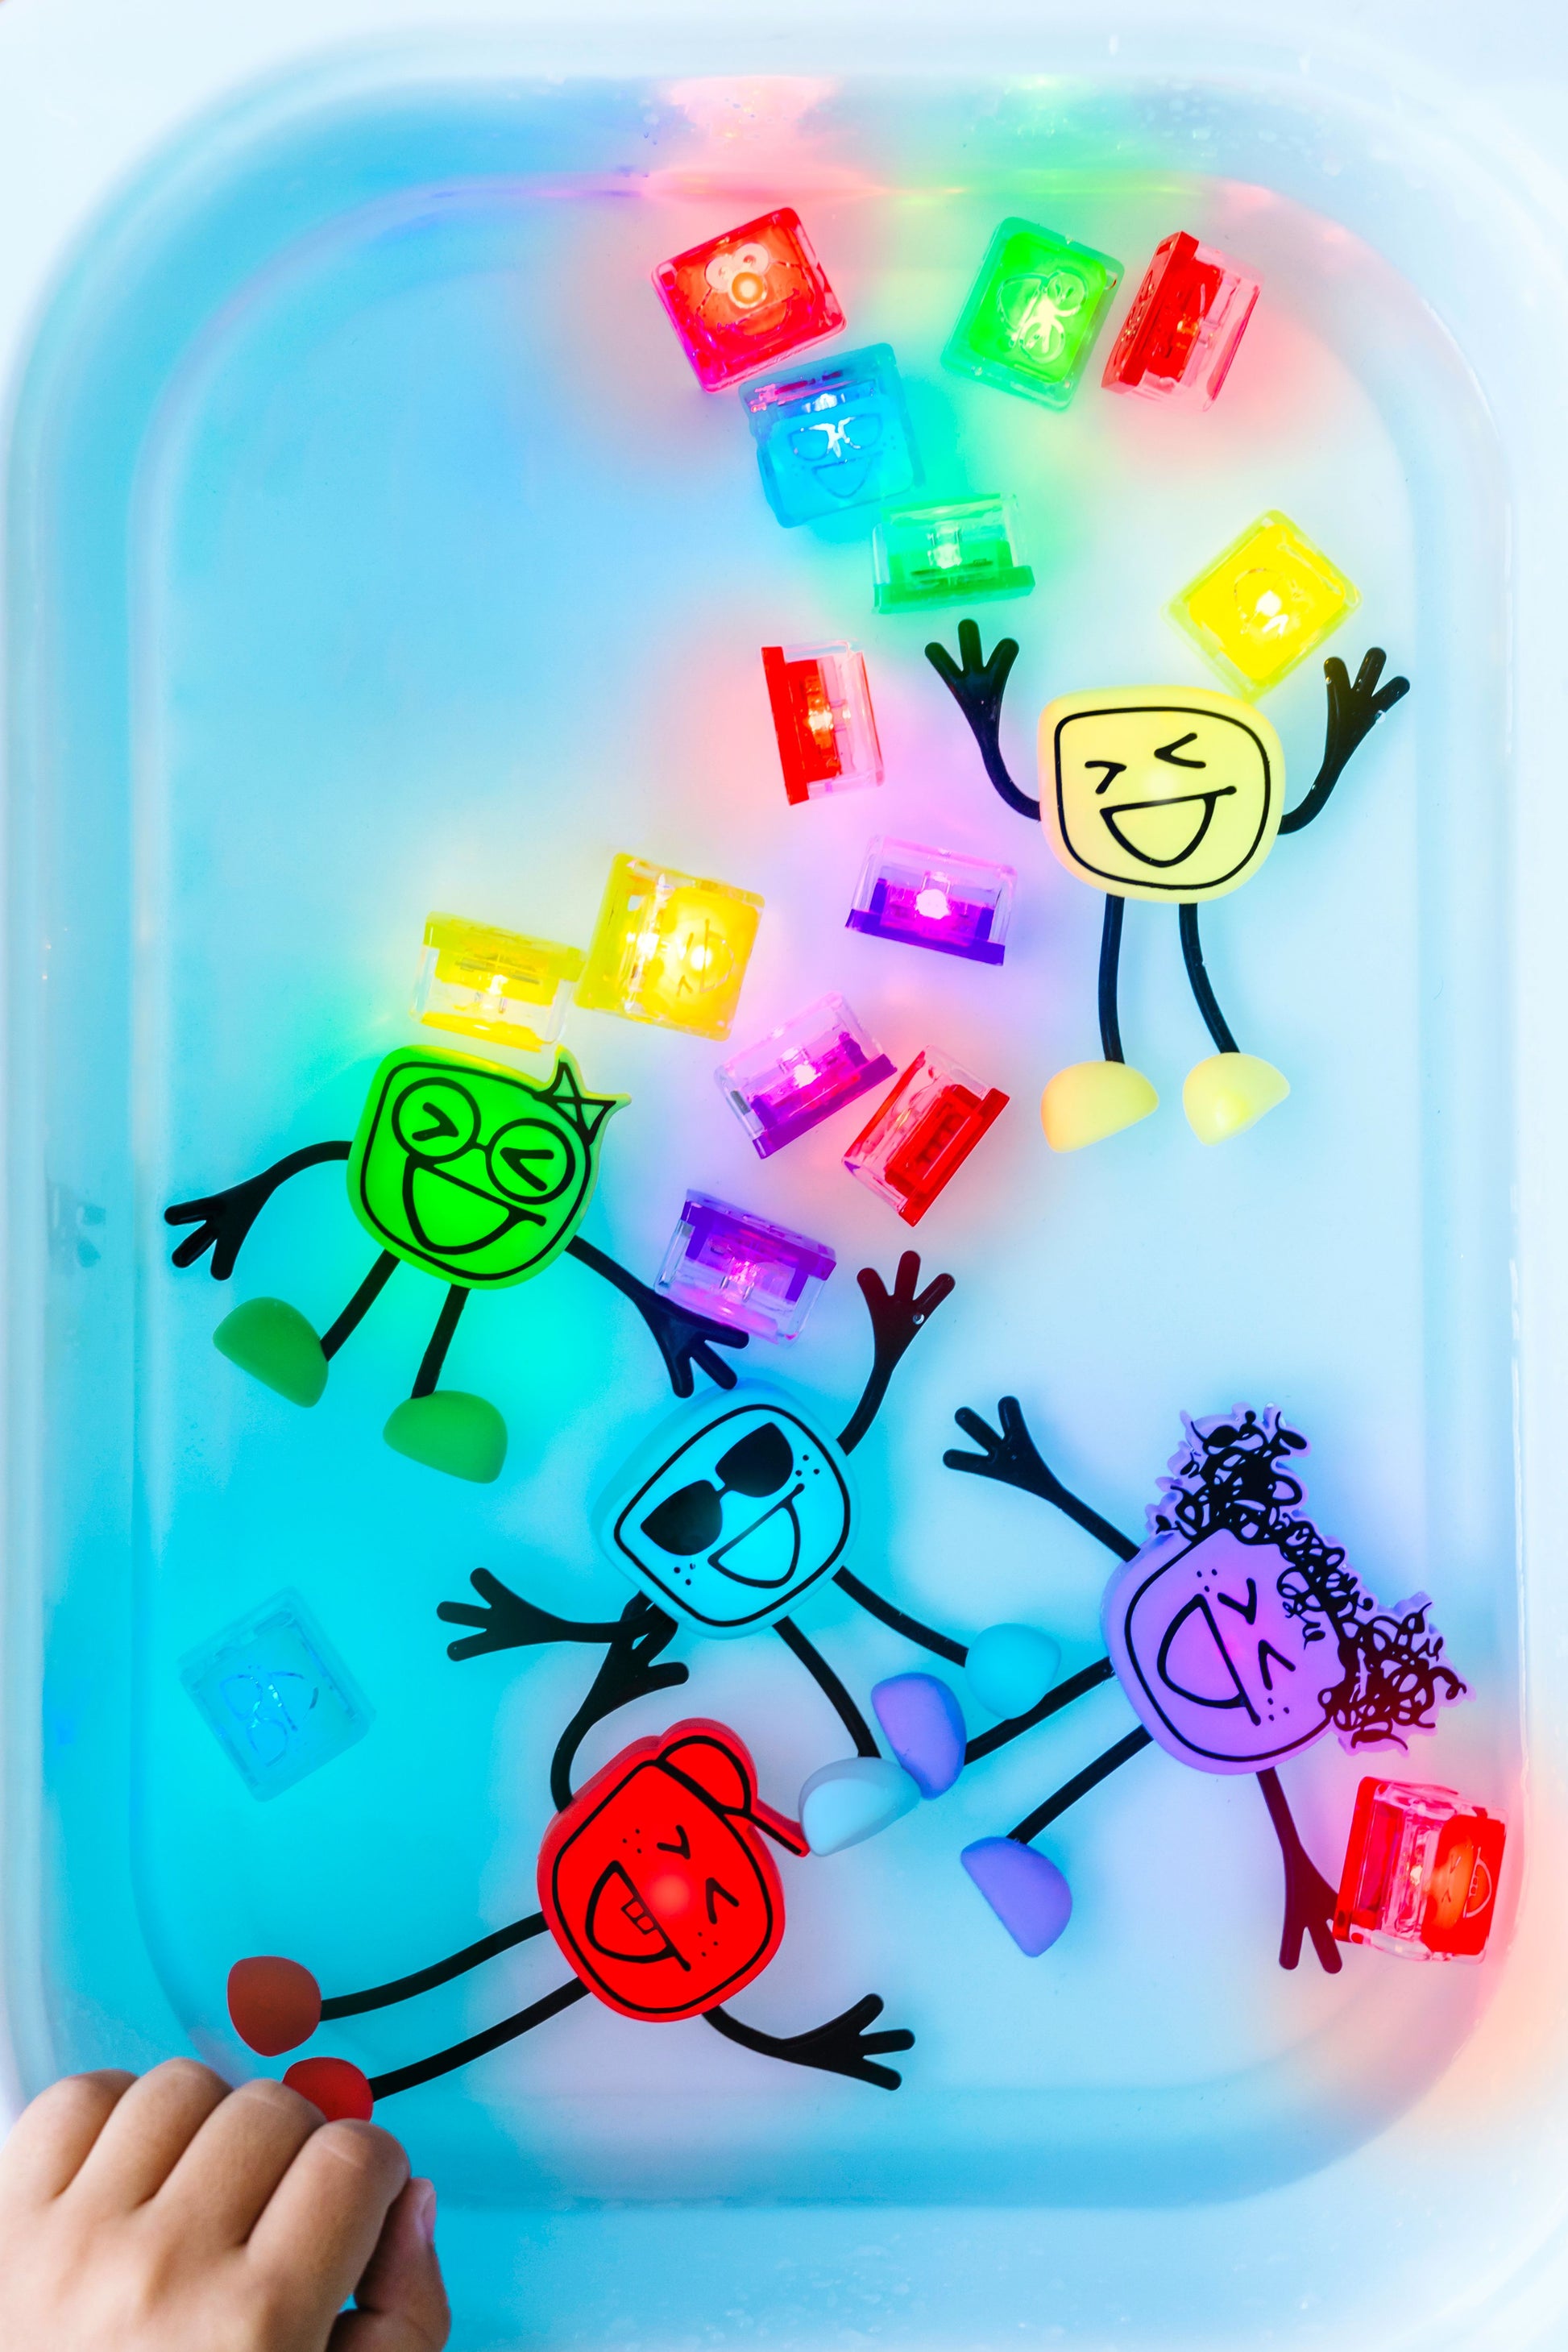 Jelly_stone_designs_glo_pal_characters_floating_in_a_sensory_tub_with_water_and_other_glo_cubes